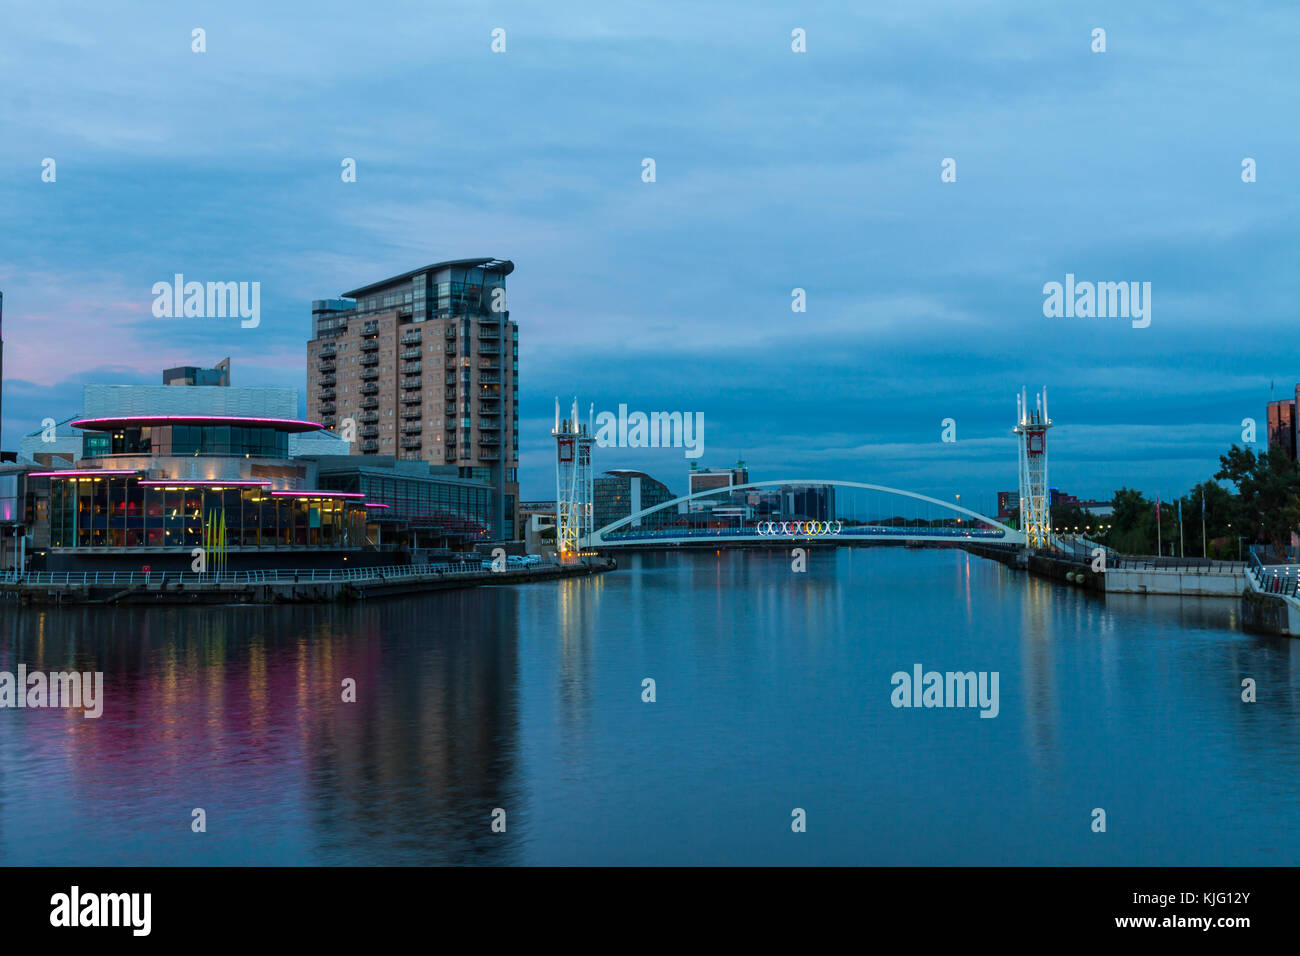 Image of the Lowry Theatre and Lowry Art Gallery taken from the Manchester Ship Canal in the early evening with the Millennium Bridge in background. Stock Photo